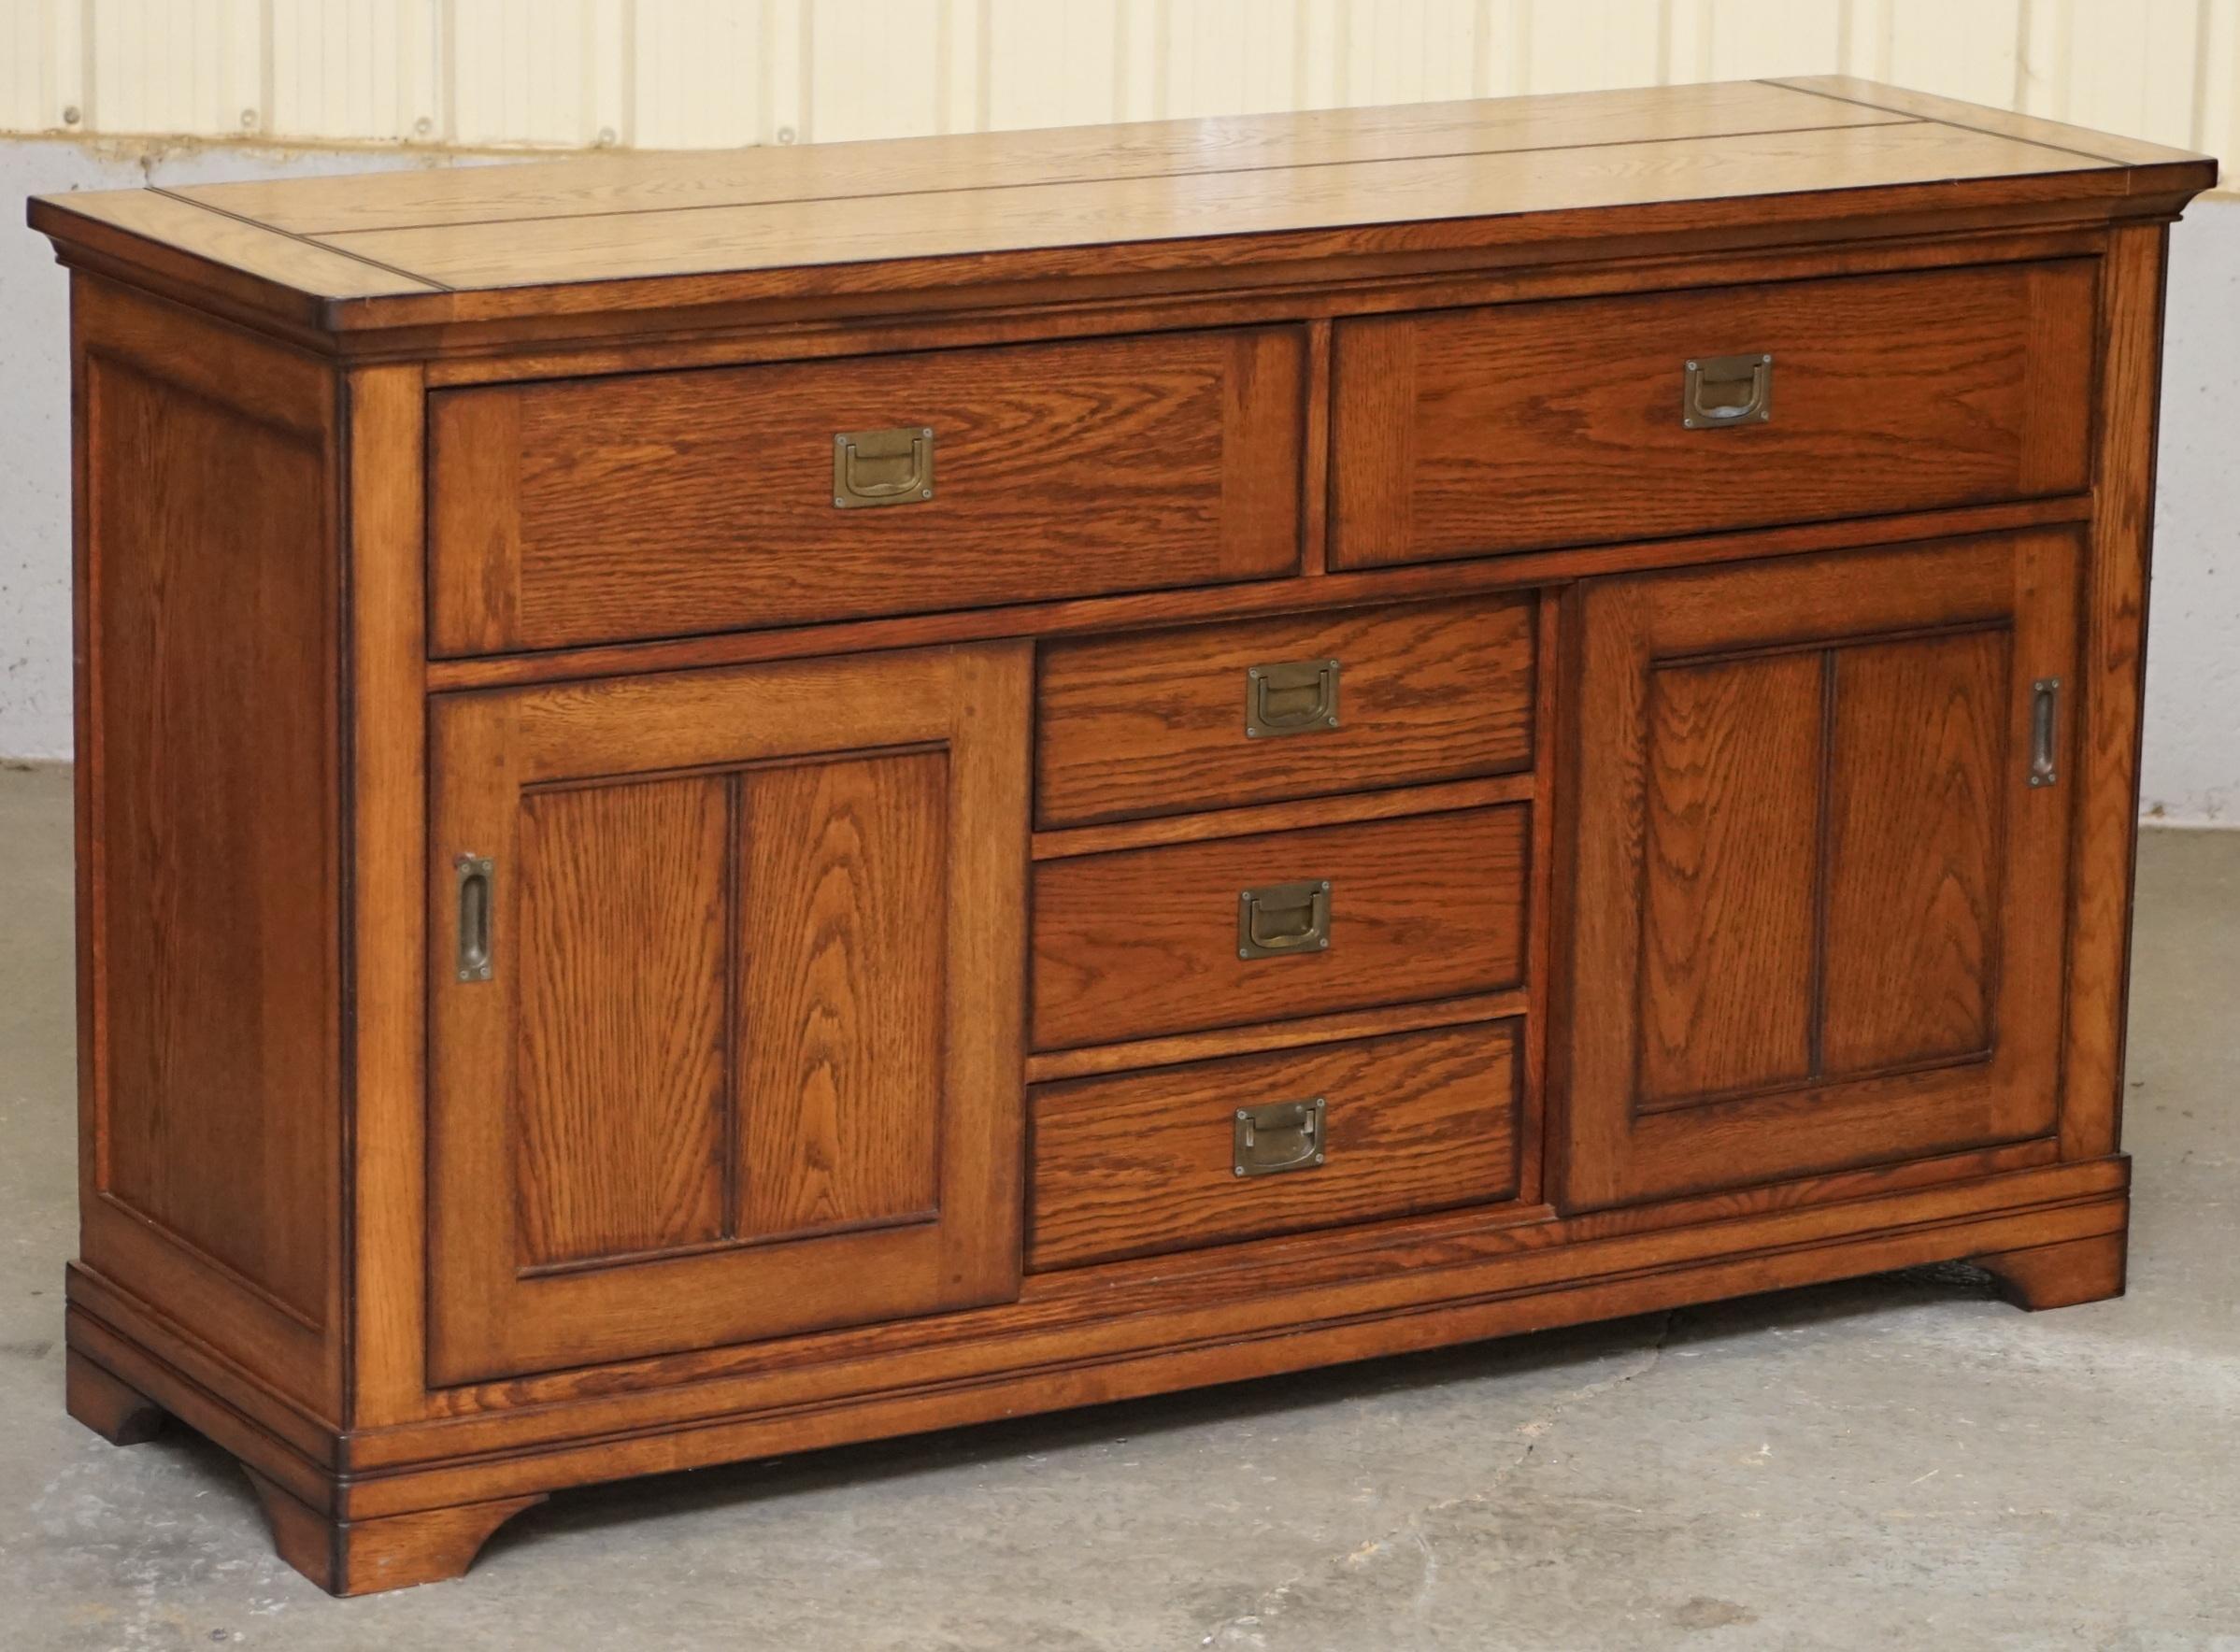 We are delighted to offer for sale this stunning solid oak Campaign style sideboard with drawers and cupboard 

A very good looking well made and substantial piece of furniture, its very solid and well made, its quite utilitarian and can be used